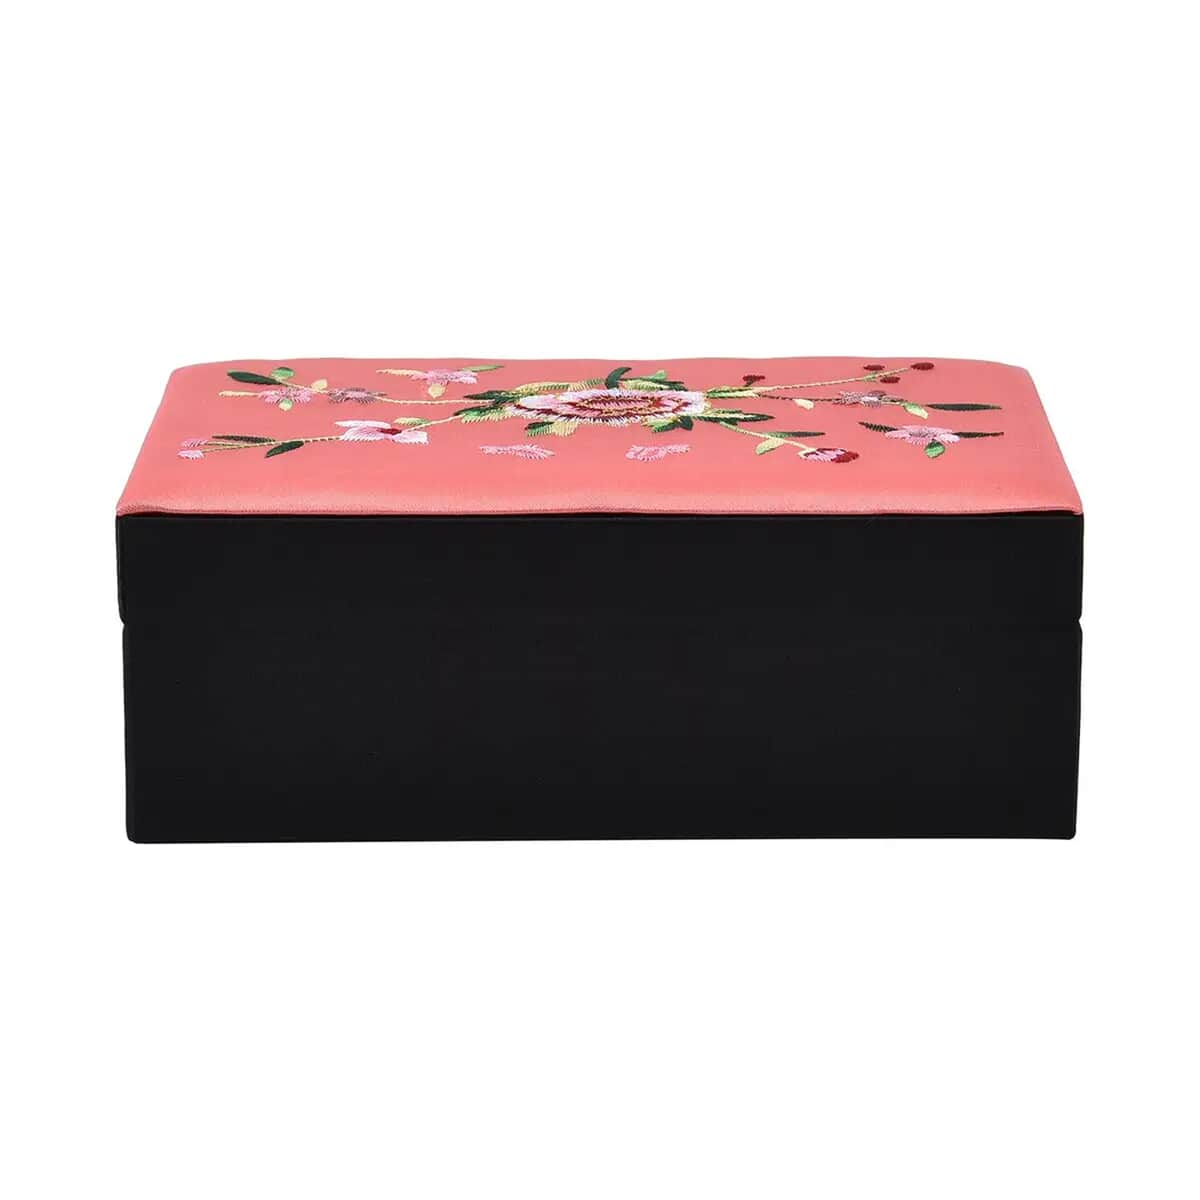 Orange Flower Pattern Embroidery Satin Jewelry Box with Lock image number 5